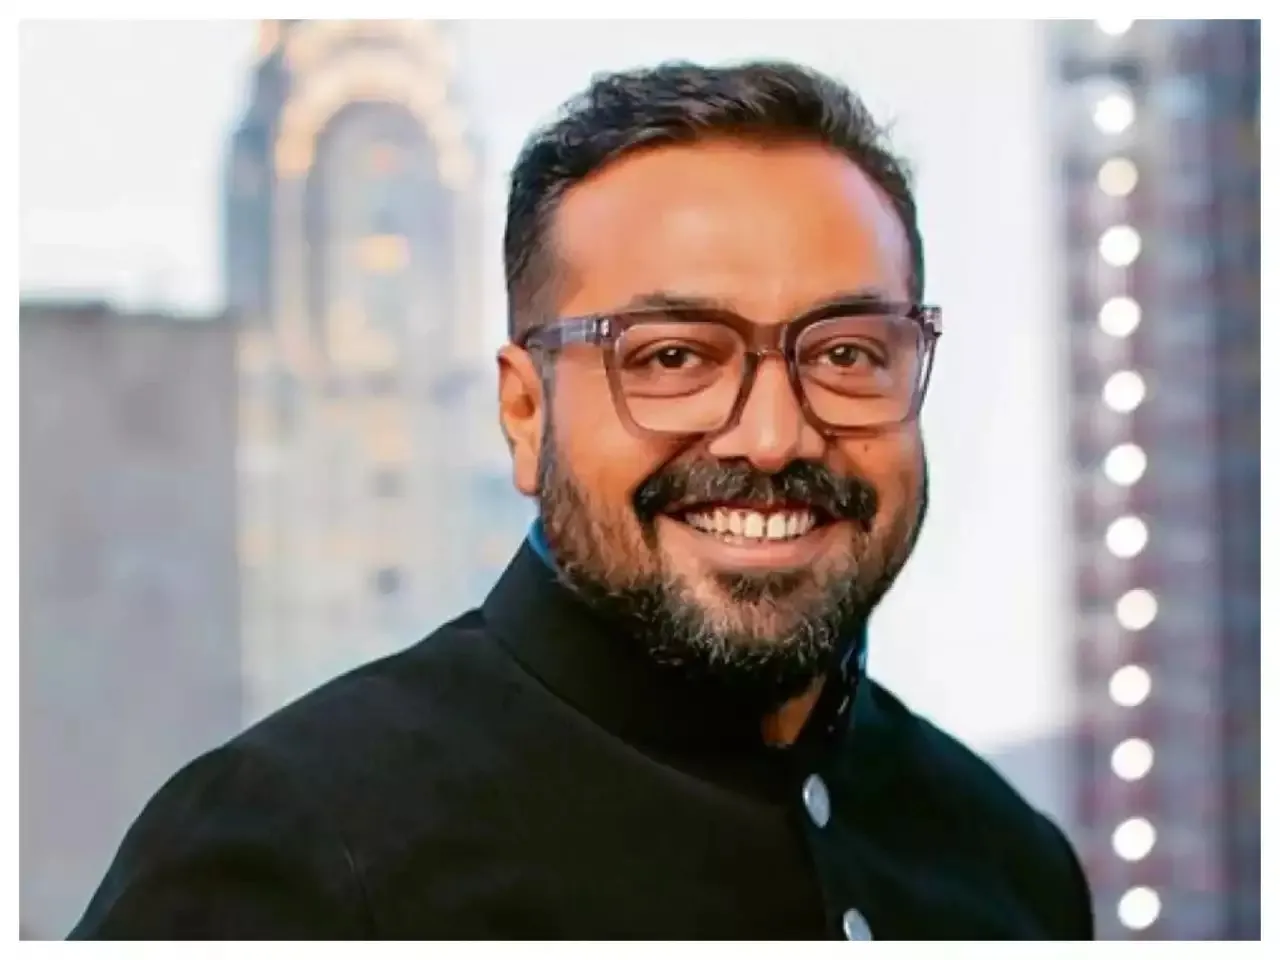 Fearless producers are making all the difference, says Anurag Kashyap